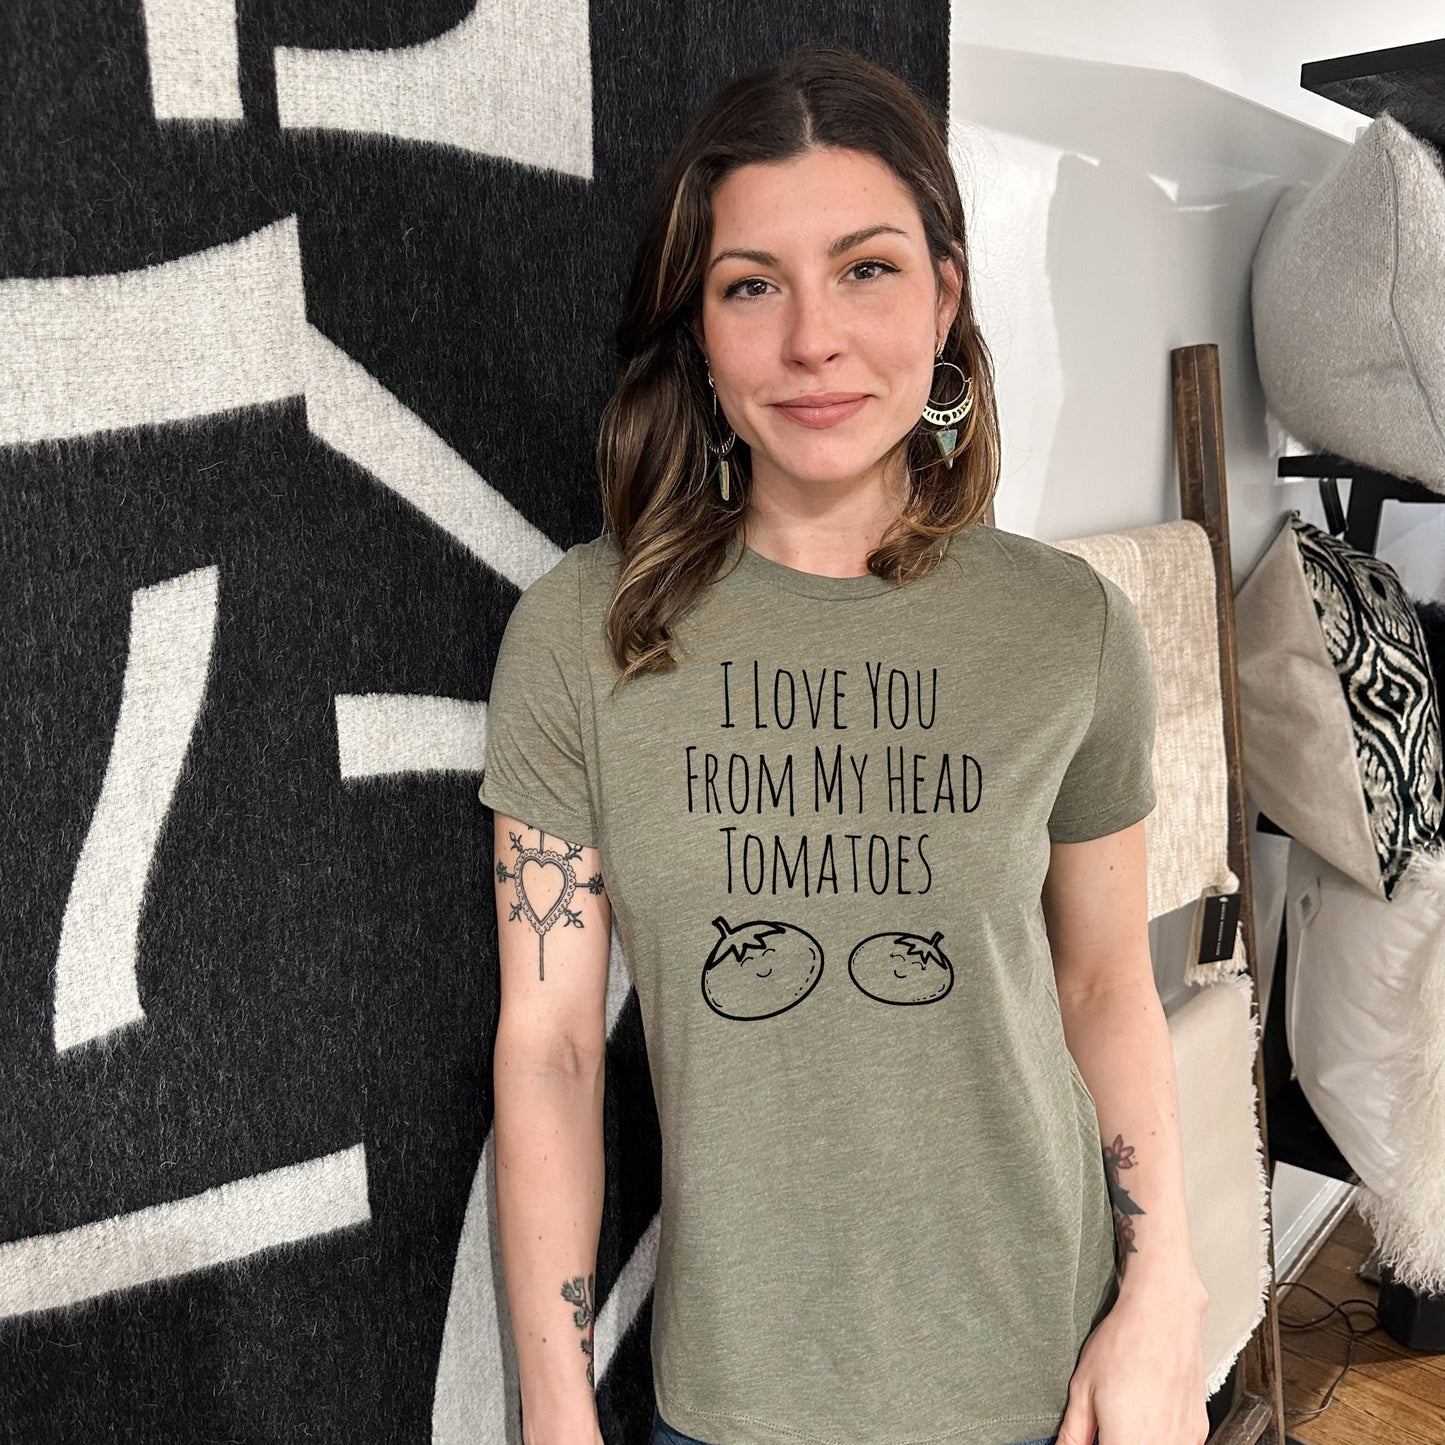 I Love You From My Head Tomatoes - Women's Crew Tee - Olive or Dusty Blue